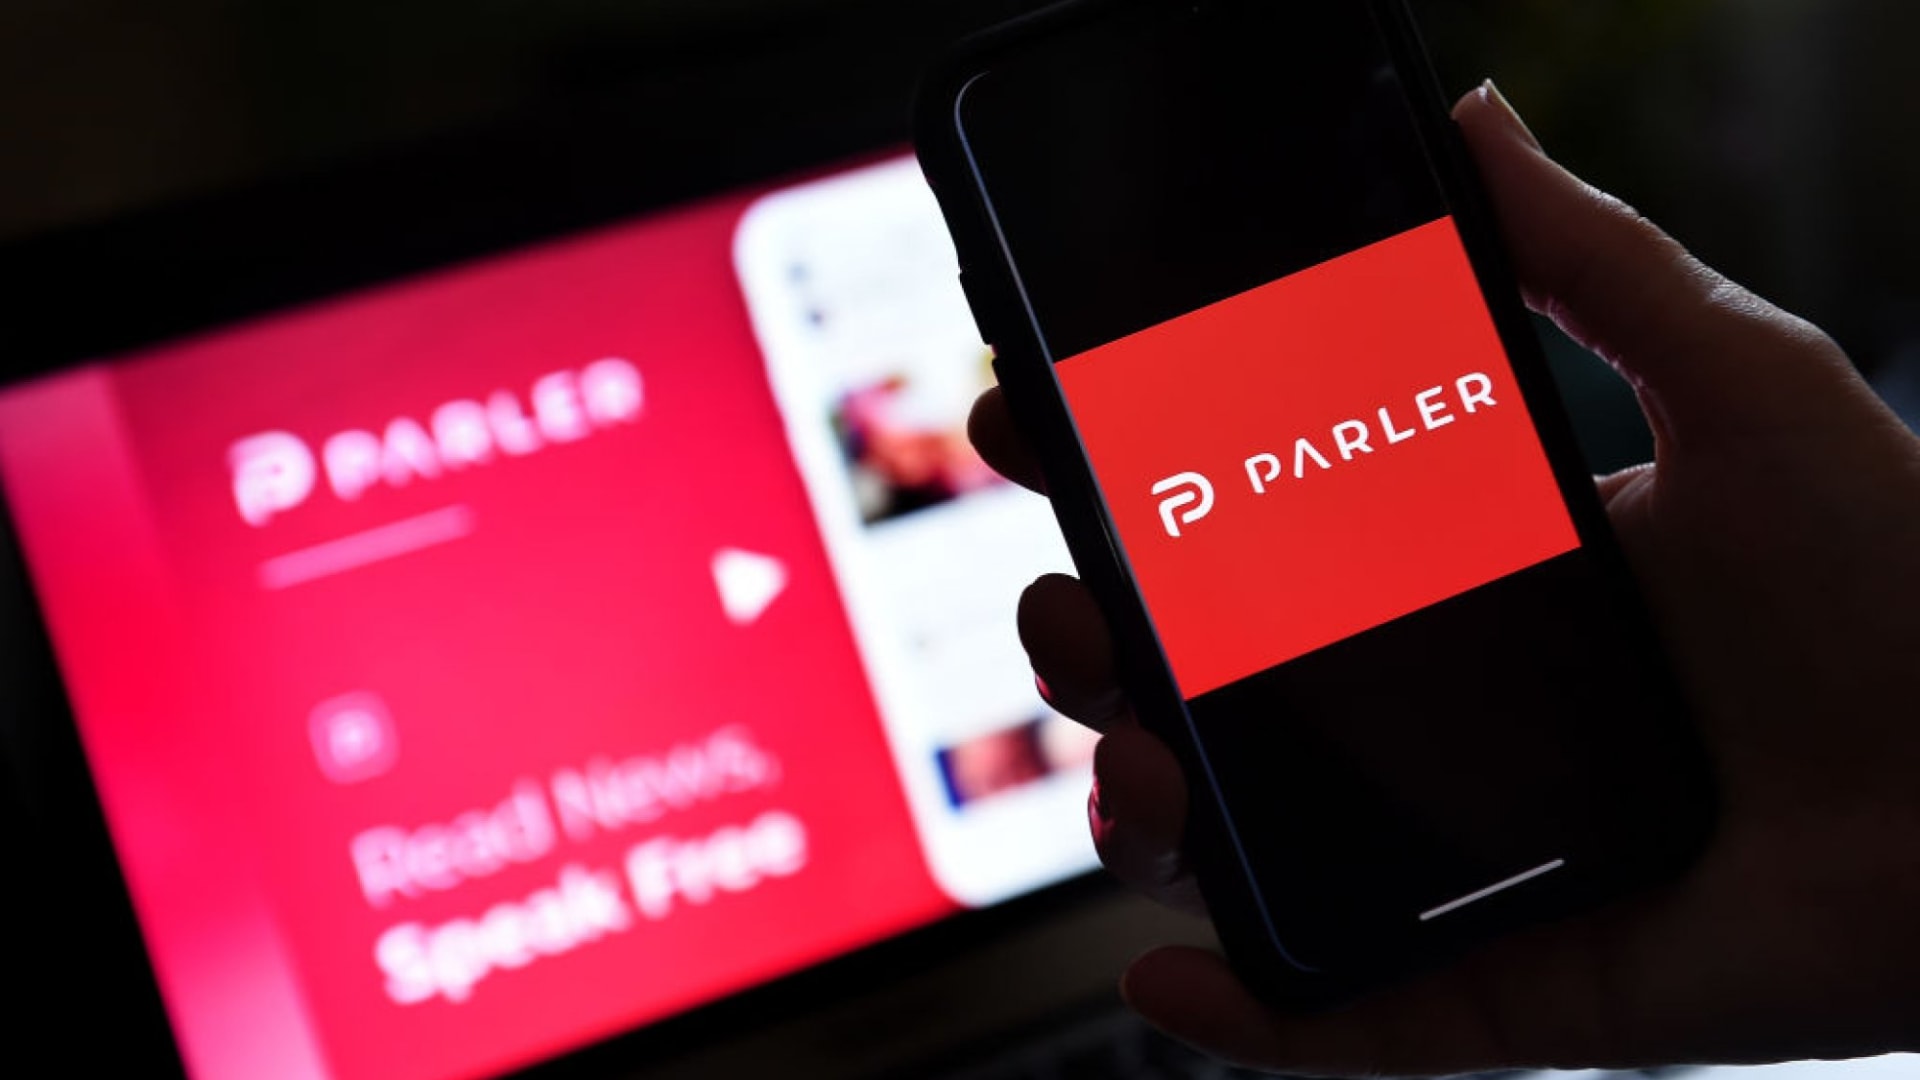 People Are Planning to Ditch Their iPhones Over Apple's Ban of Parler. That's a Terrible Idea